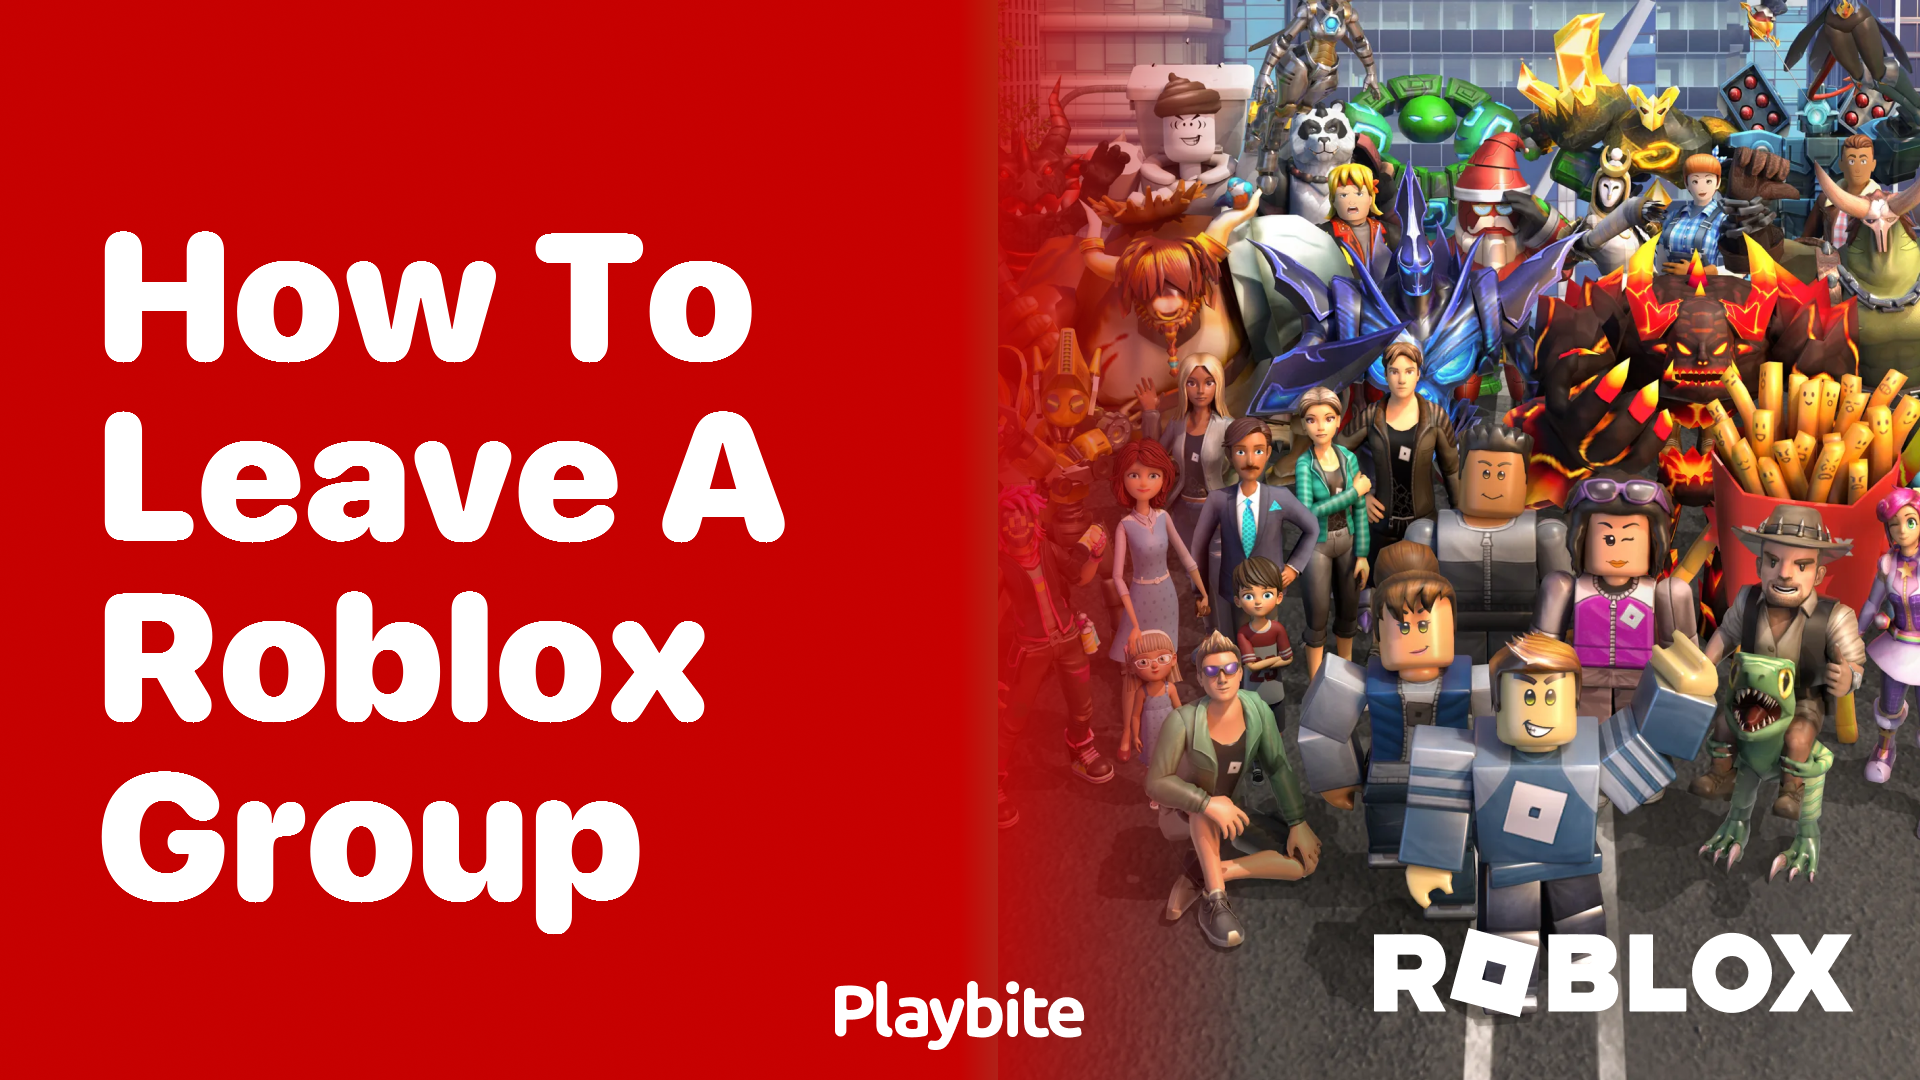 How to Leave a Roblox Group: A Simple Guide